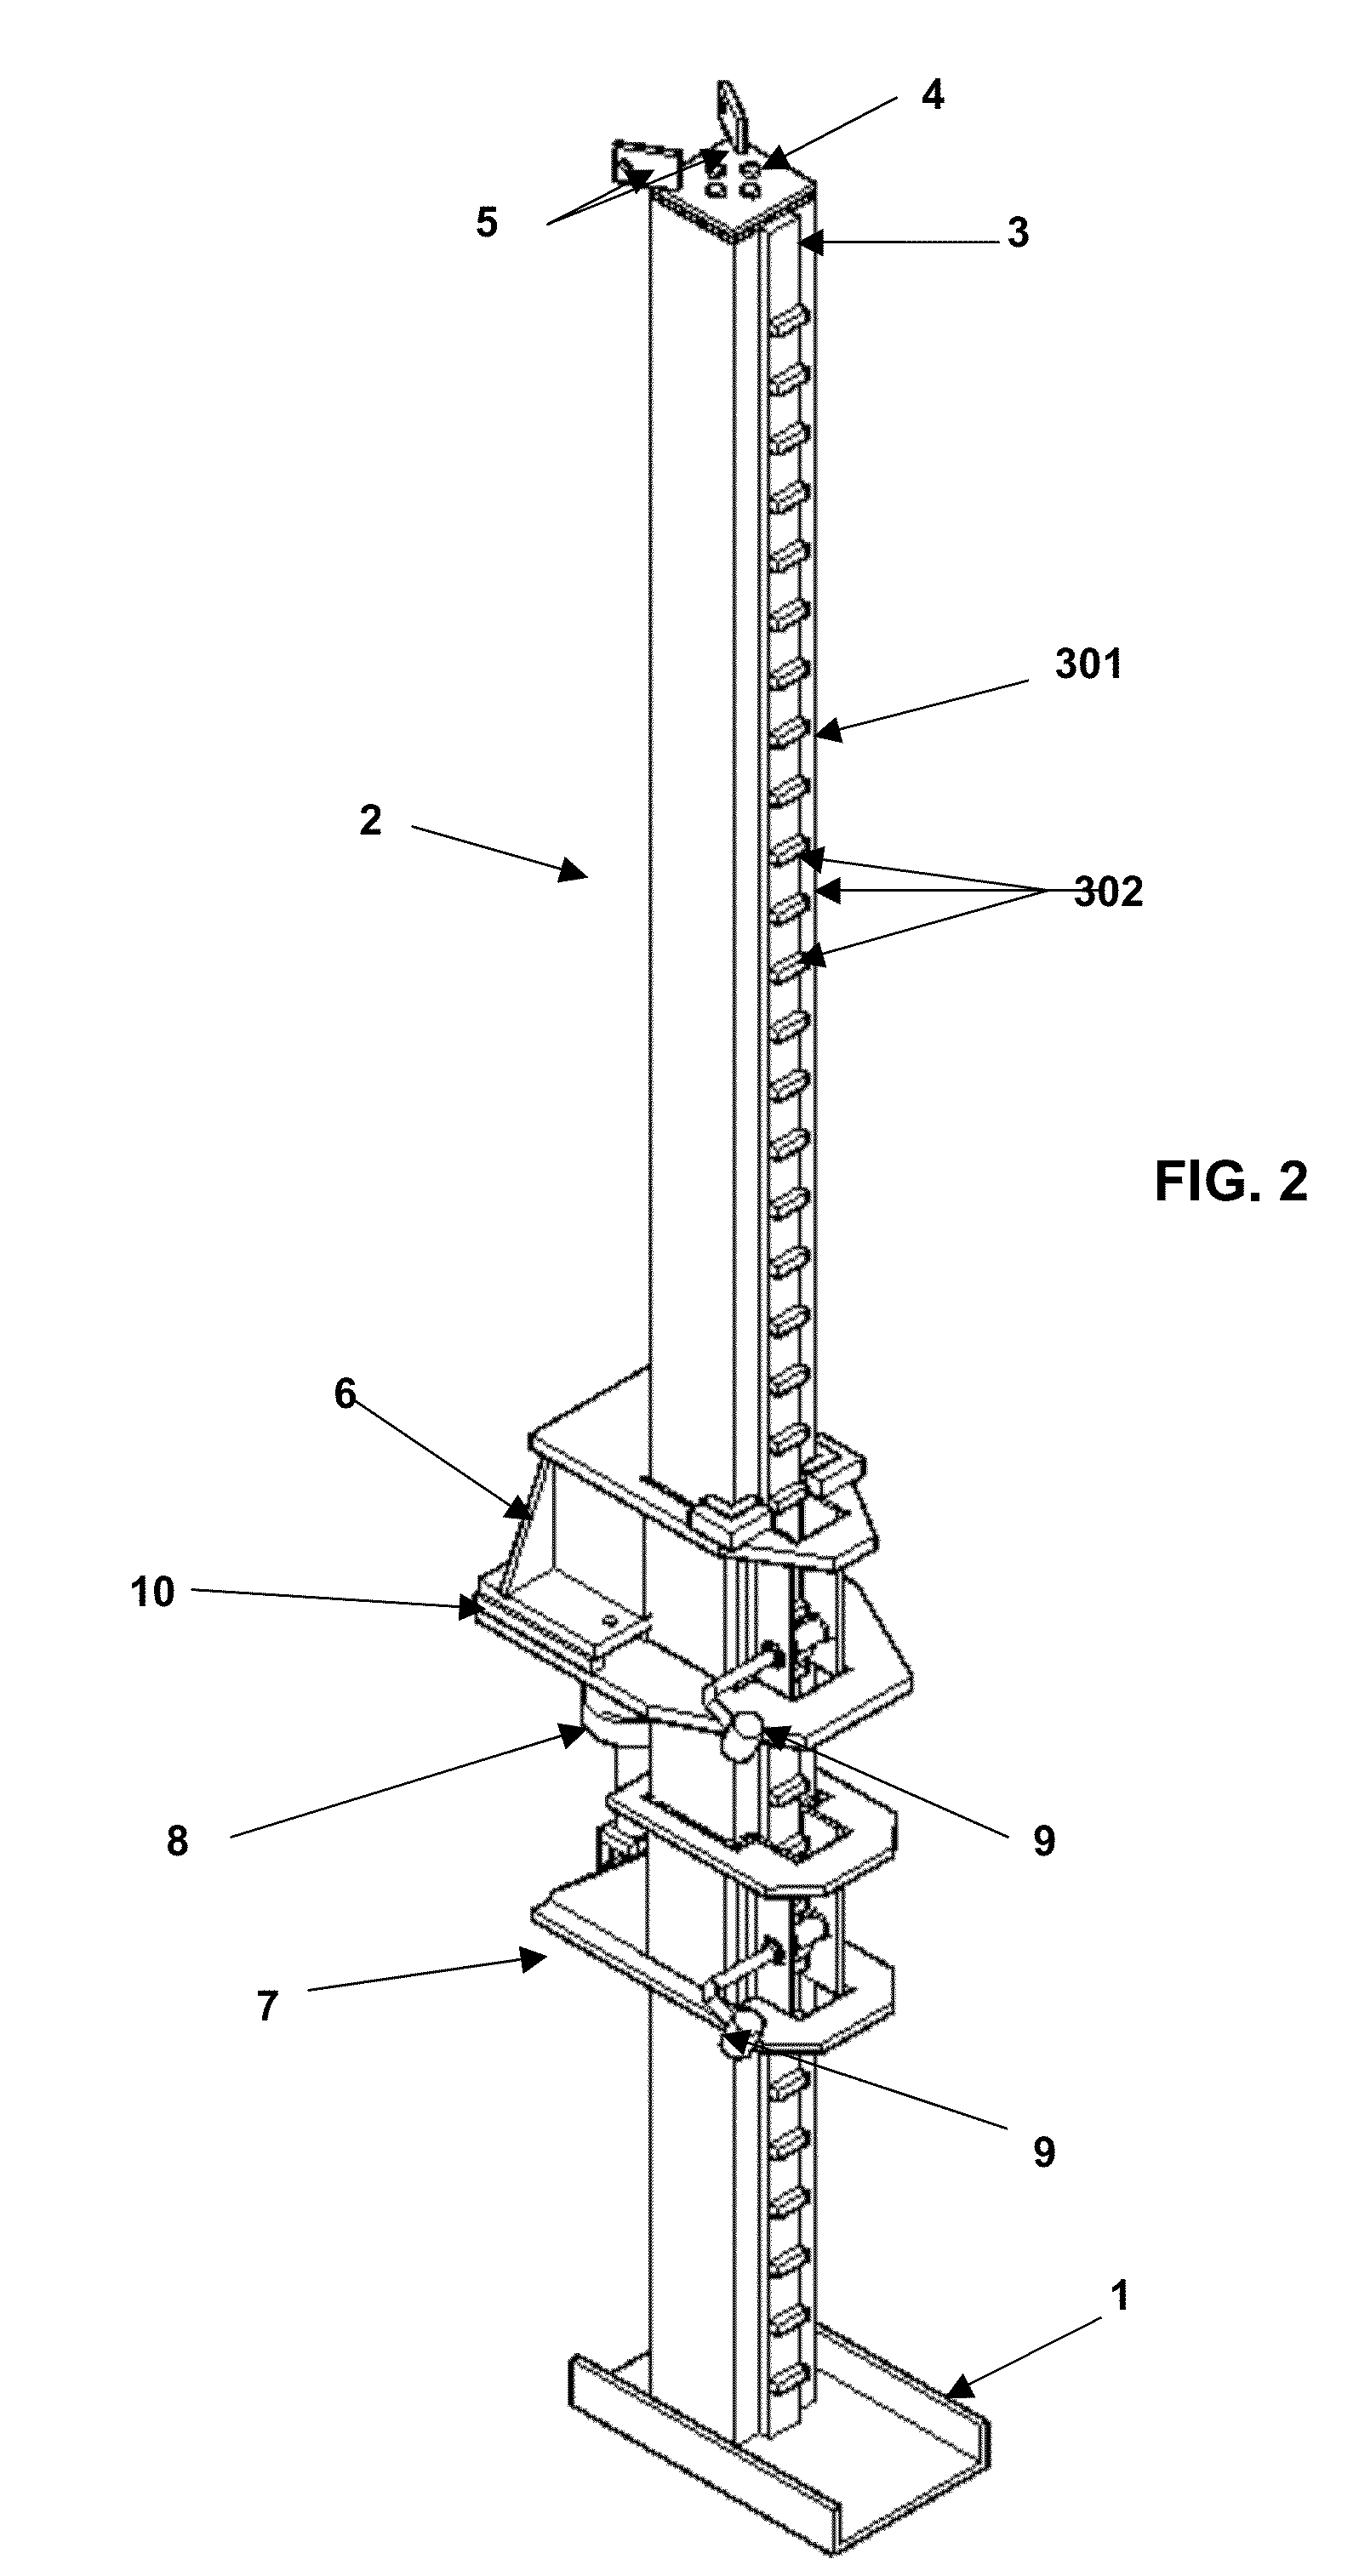 Collapsible hoisting device for use in the construction of large metal containers, and removable accessory applicable thereto